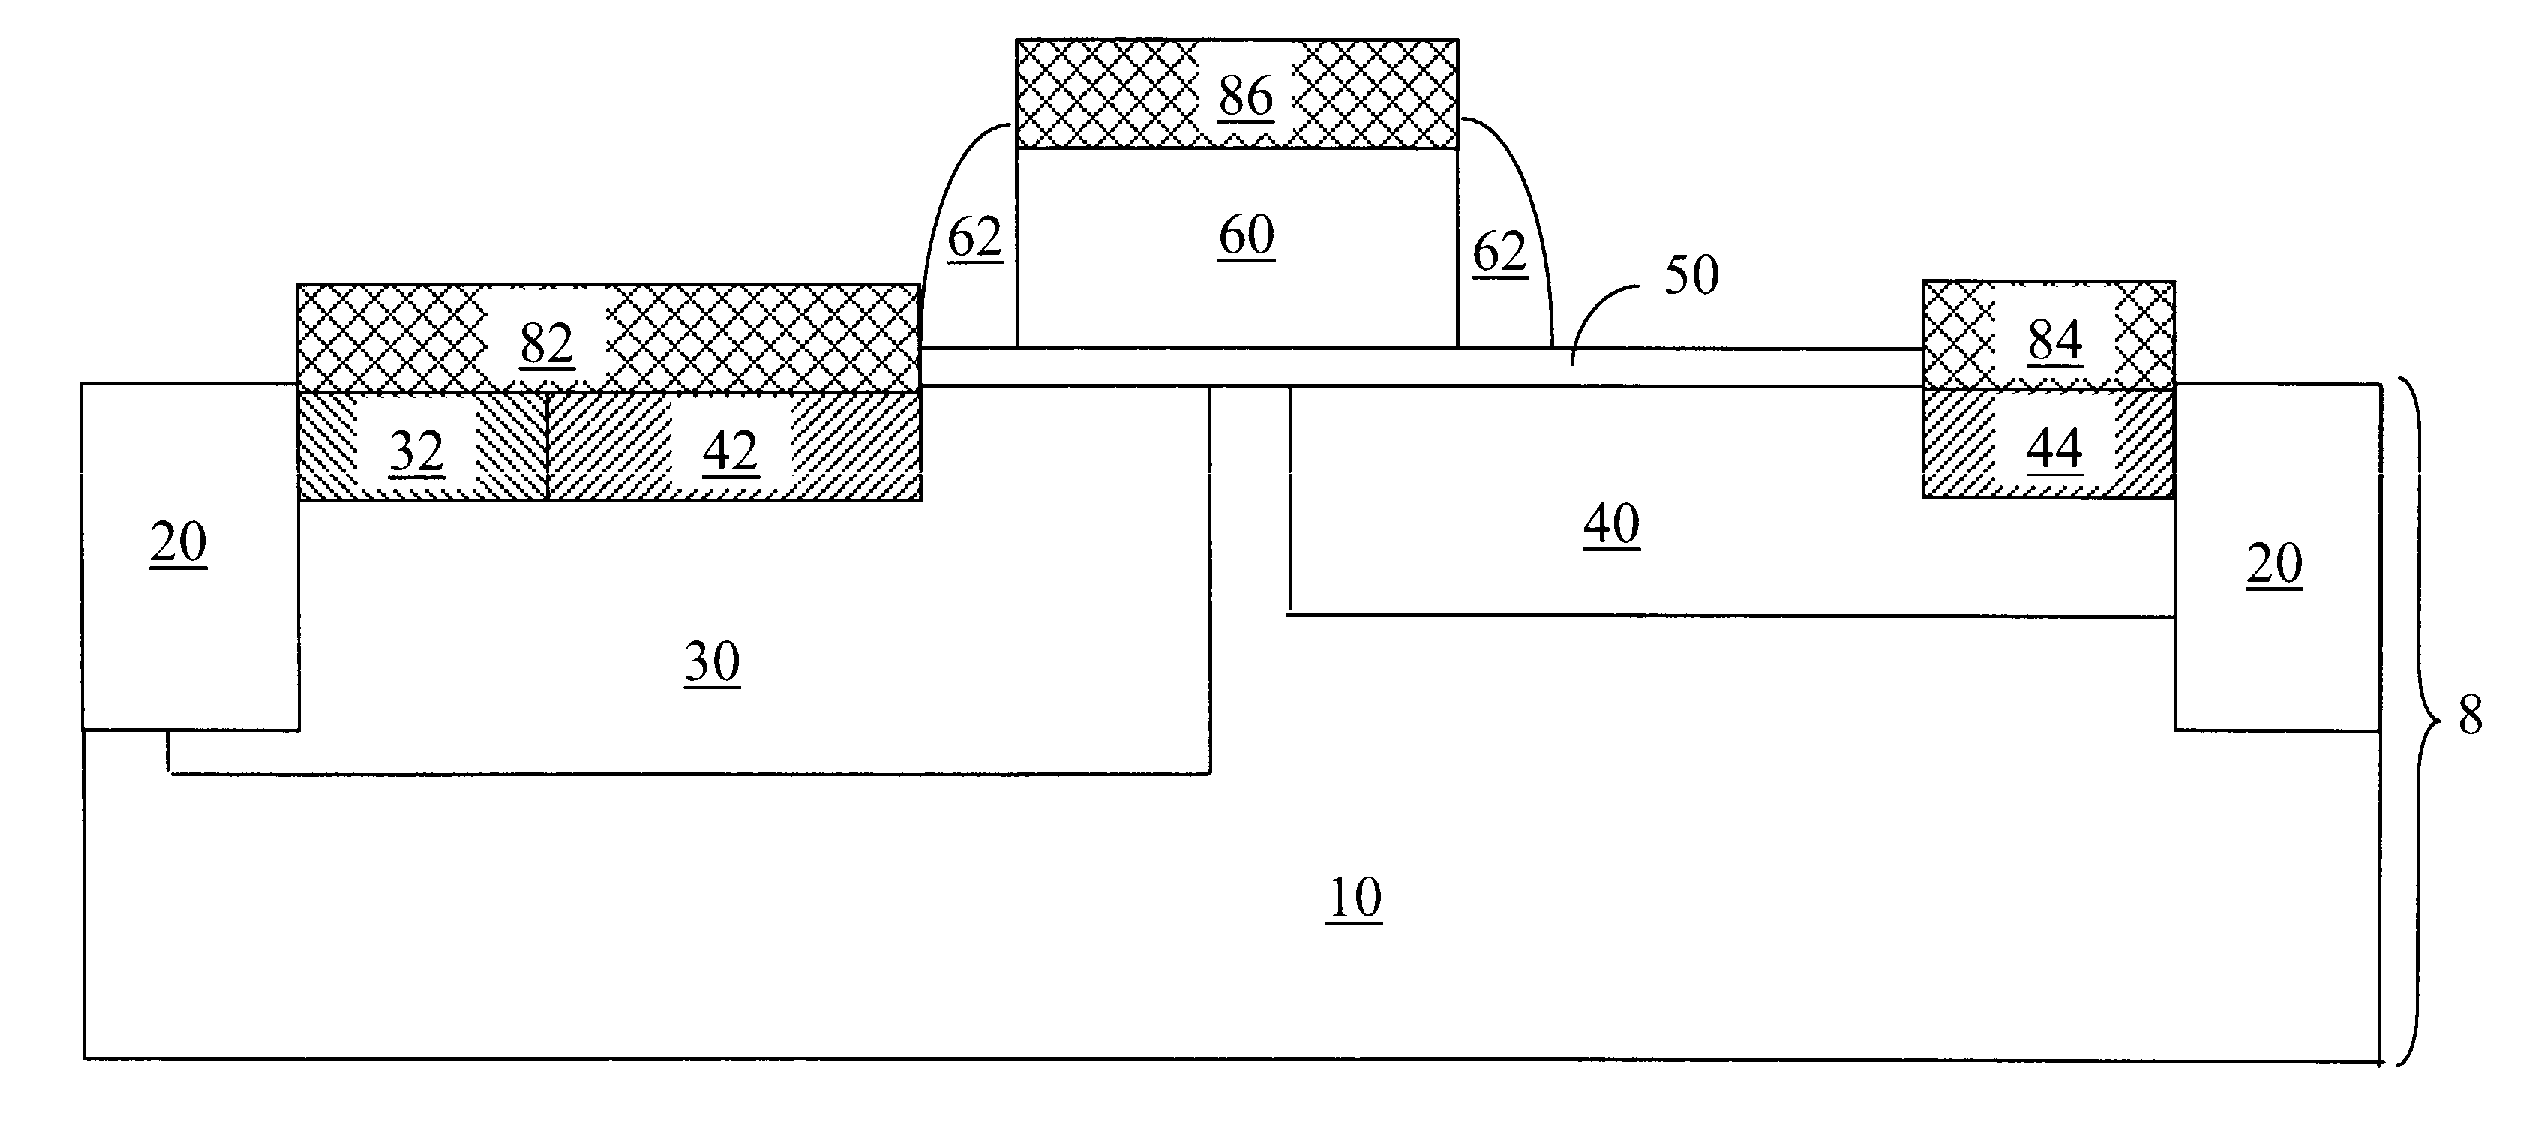 Lateral diffusion field effect transistor with drain region self-aligned to gate electrode